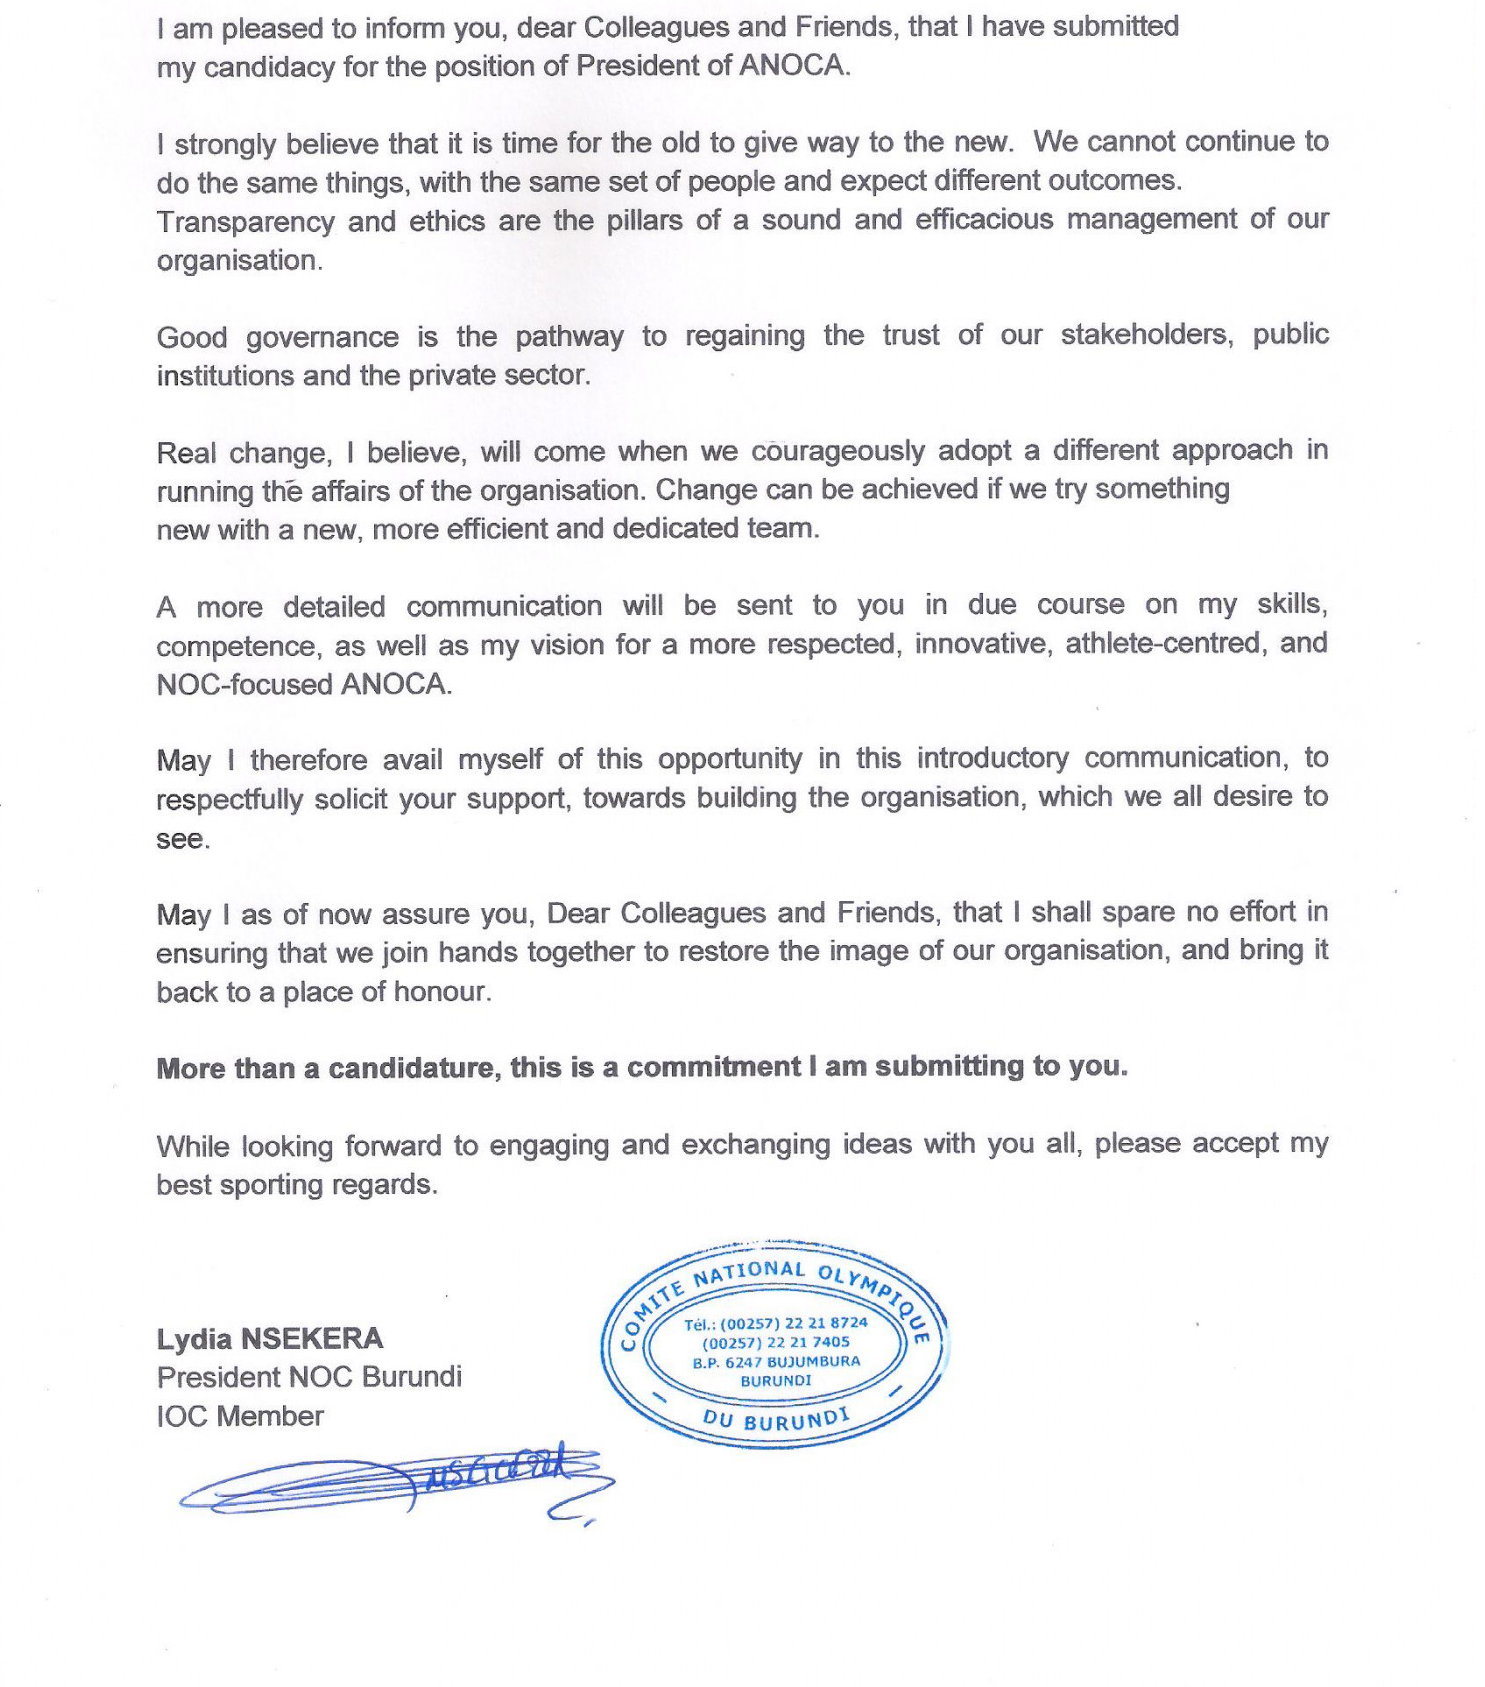 Lydia Nsekera wrote to ANOCA members to confirm her candidacy ©ITG